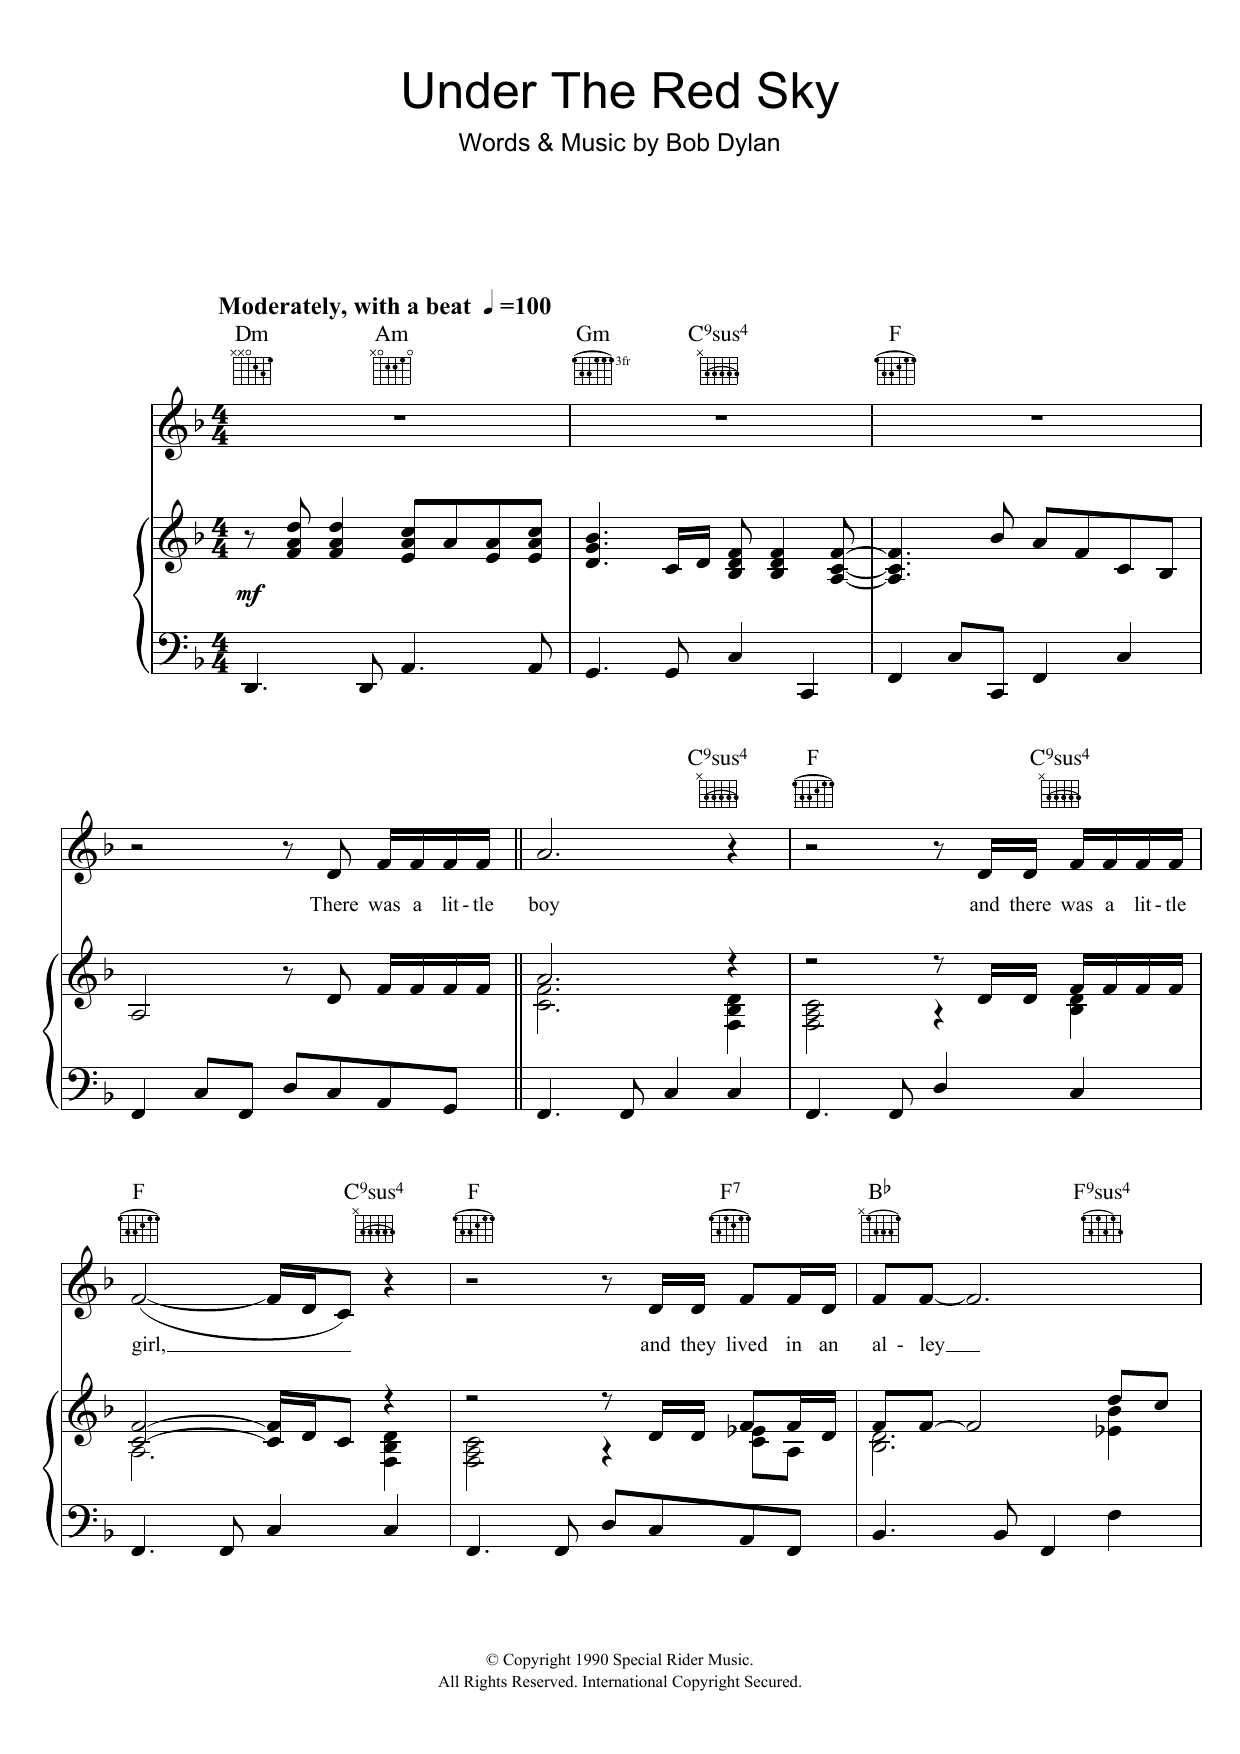 Download Bob Dylan Under The Red Sky Sheet Music